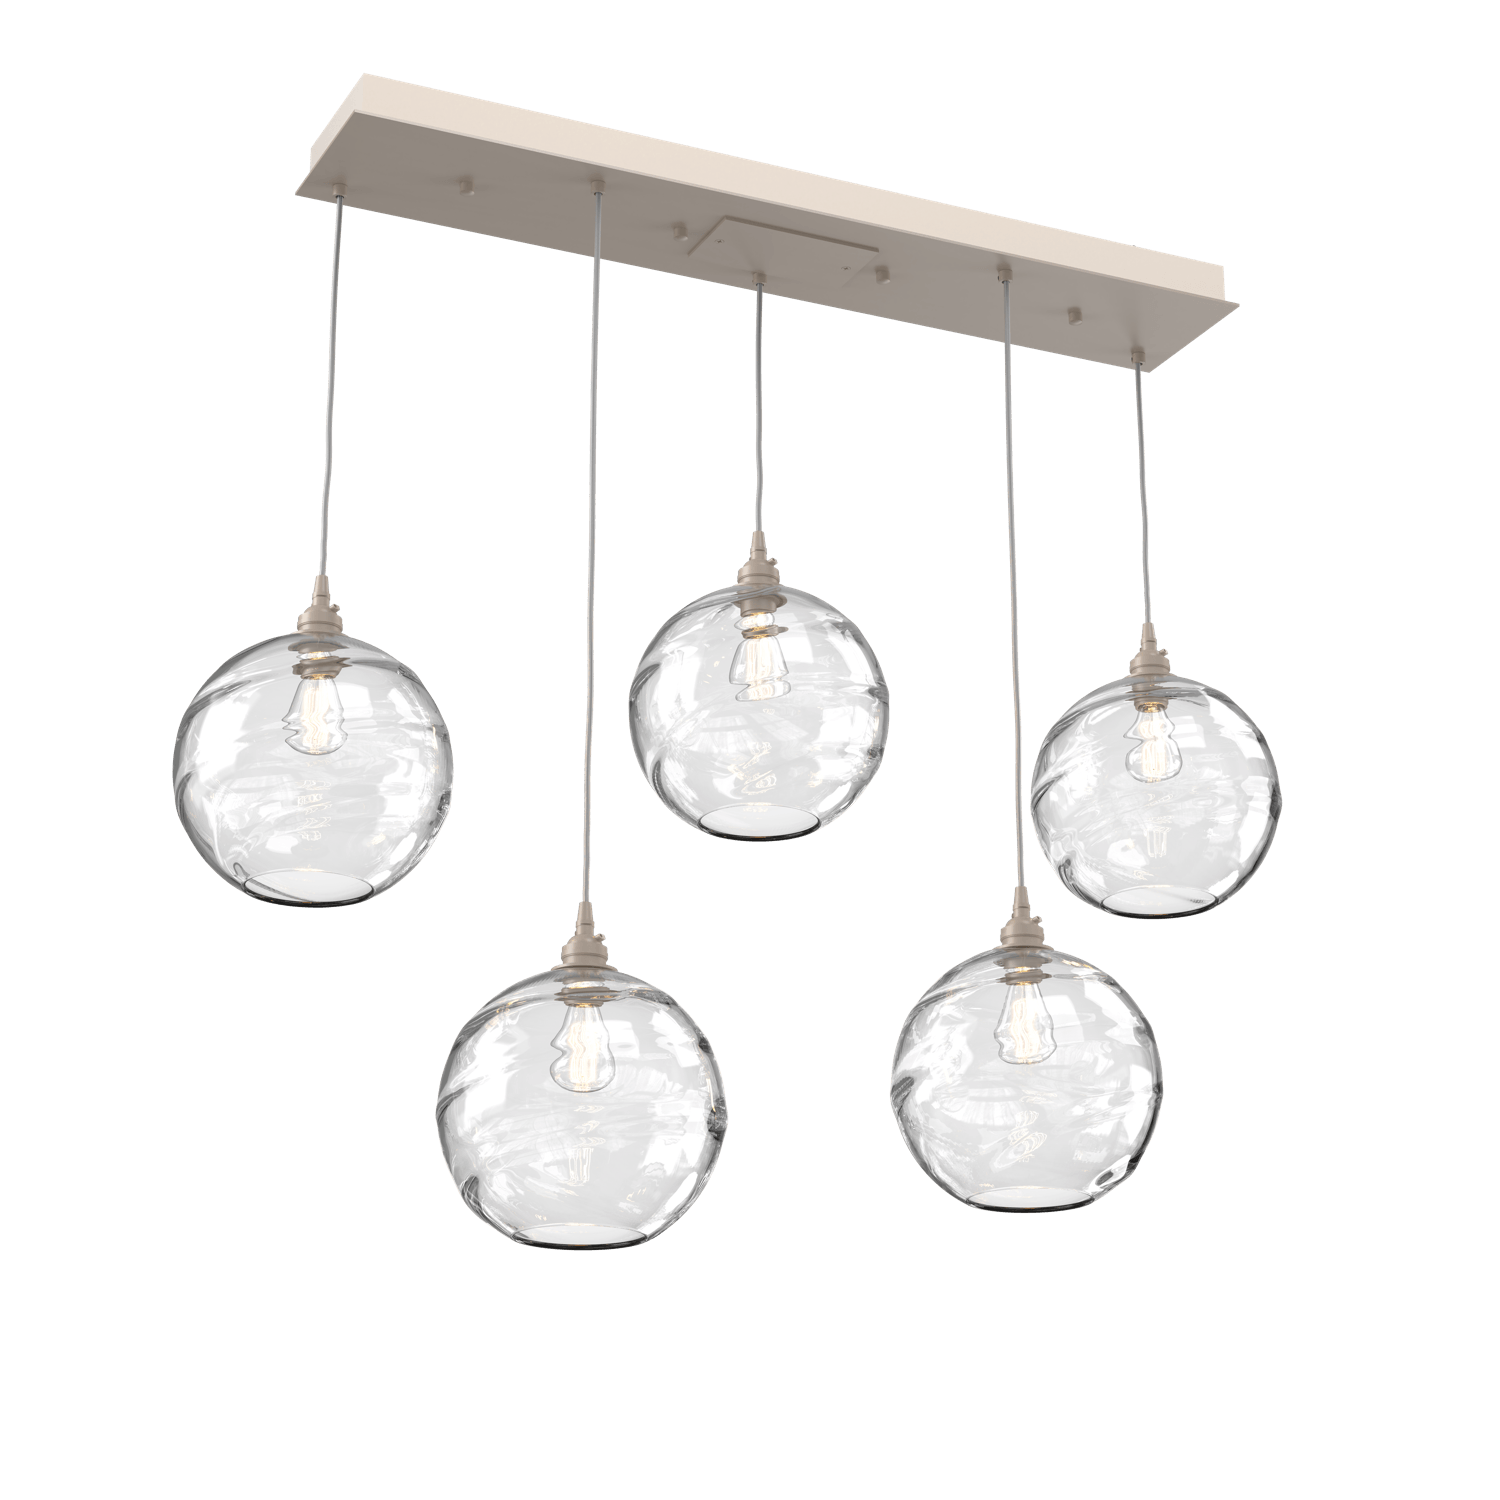 PLB0047-05-BS-OC-Hammerton-Studio-Optic-Blown-Glass-Terra-5-light-linear-pendant-chandelier-with-metallic-beige-silver-finish-and-optic-clear-blown-glass-shades-and-incandescent-lamping